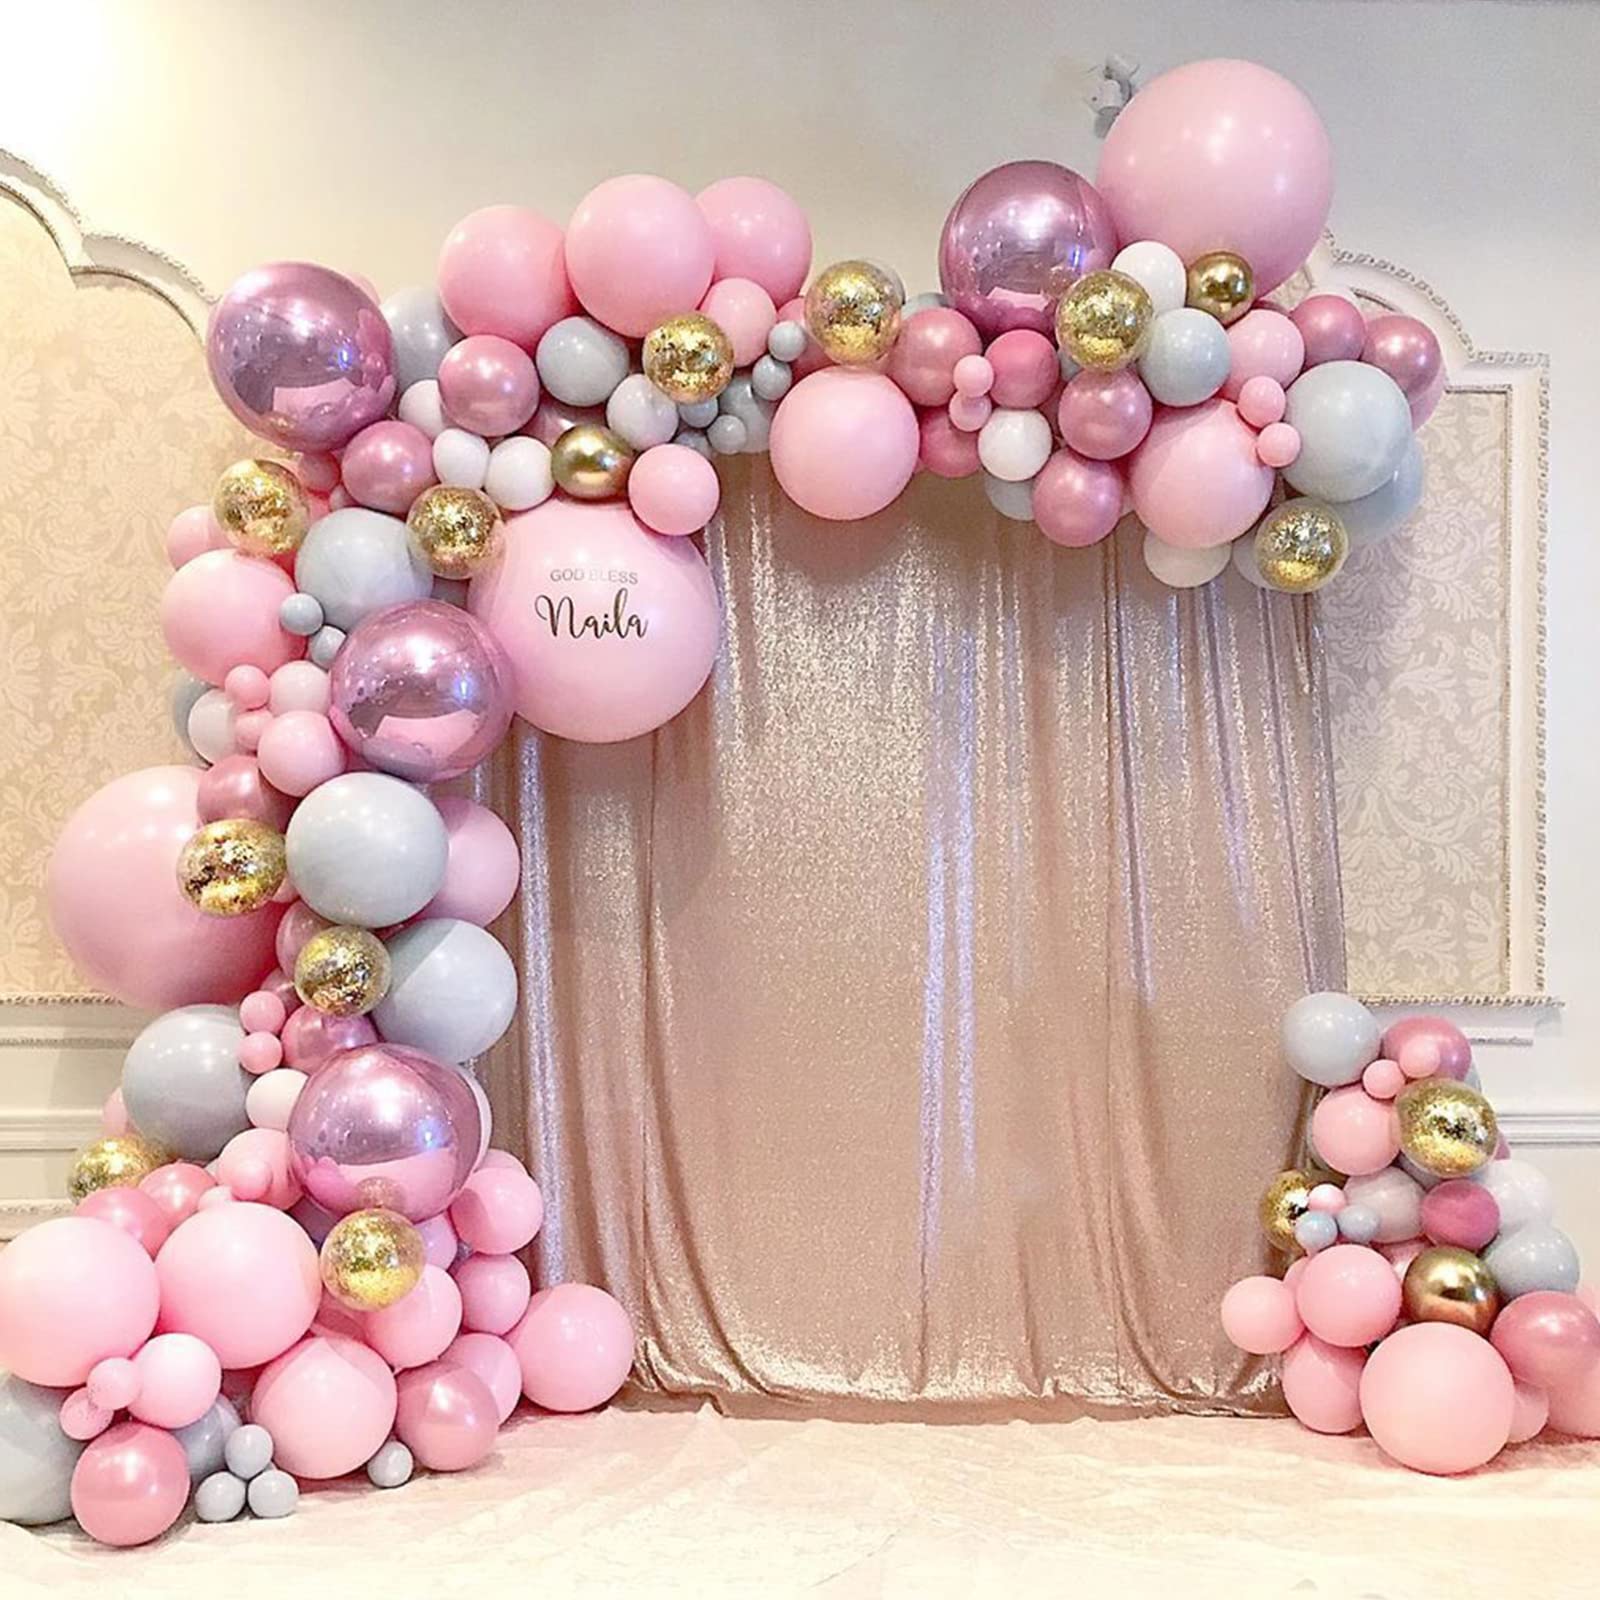 RUBFAC 87pcs Pastel Pink Balloons Different Sizes 18 12 10 5 Inches for Garland Arch, Premium Pink Latex Balloons for Girl Birthday Party Wedding Baby Shower Bridal Shower Decorations